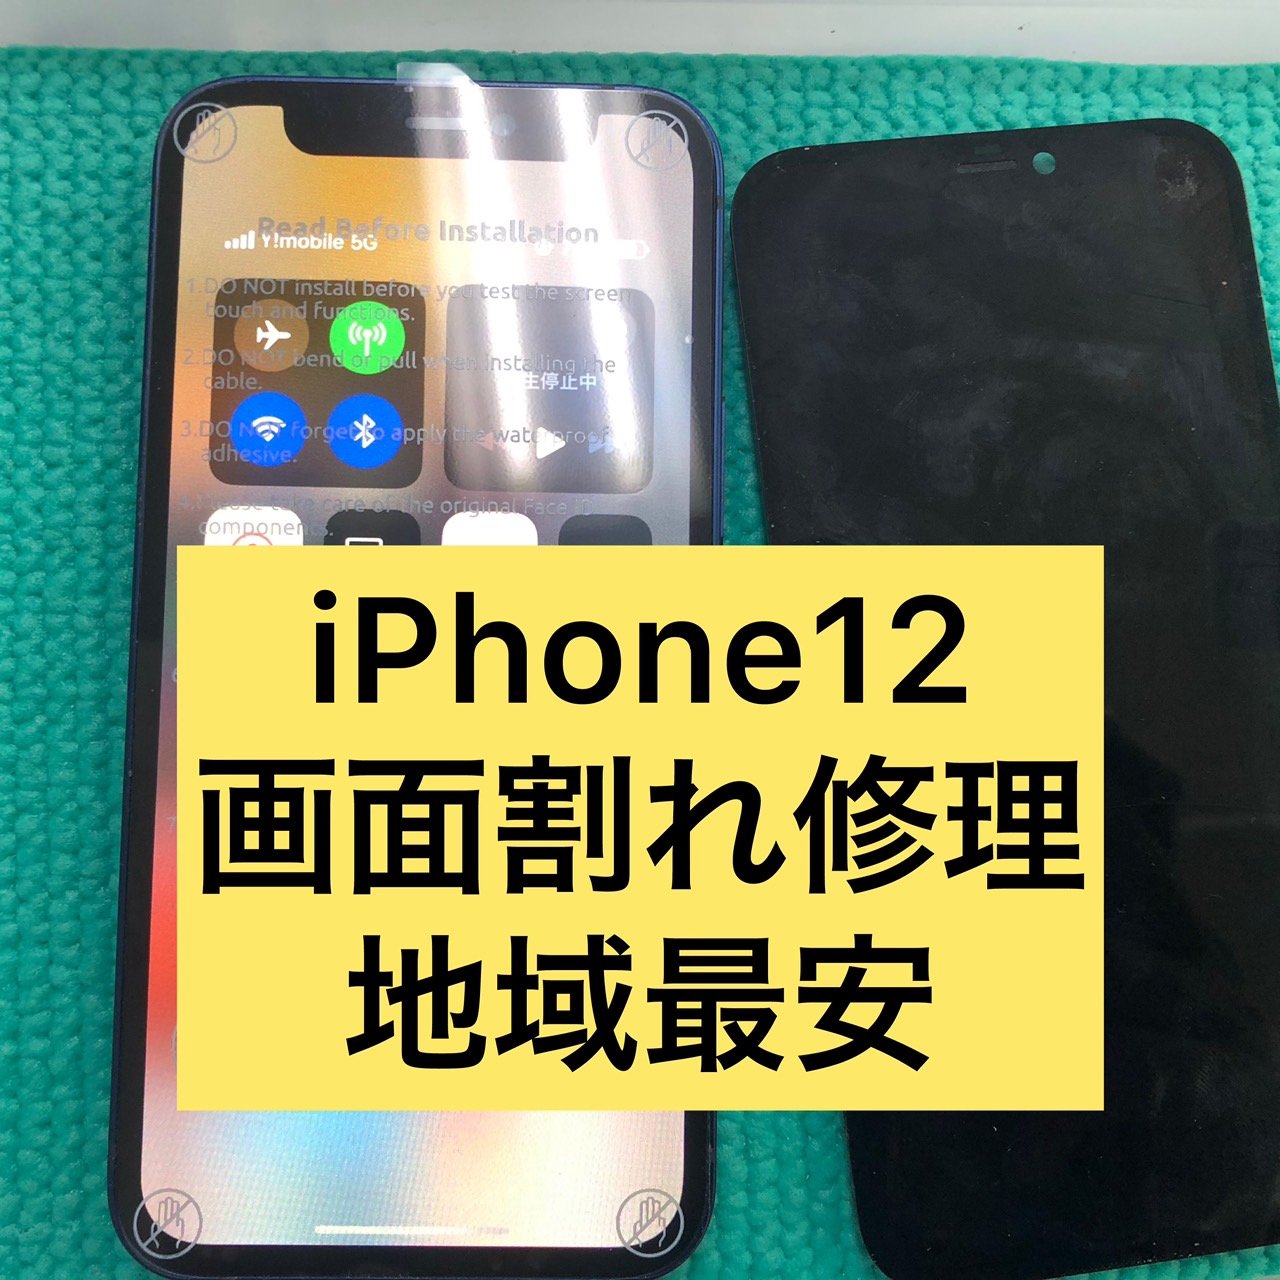 iPhone修理　安い　高田馬場、 iPhone修理　安い　池袋、 iPhone修理　安い　新宿、 iPhone修理　安い　新大久保、 iPhone修理　安い　大久保、iPhoneバッテリー交換　高田馬場、 iPhoneバッテリー交換　池袋、 iPhoneバッテリー交換　新宿、 iPhoneバッテリー交換　新大久保、 iPhoneバッテリー交換　大久保、iPhone郵送修理、iPad郵送修理